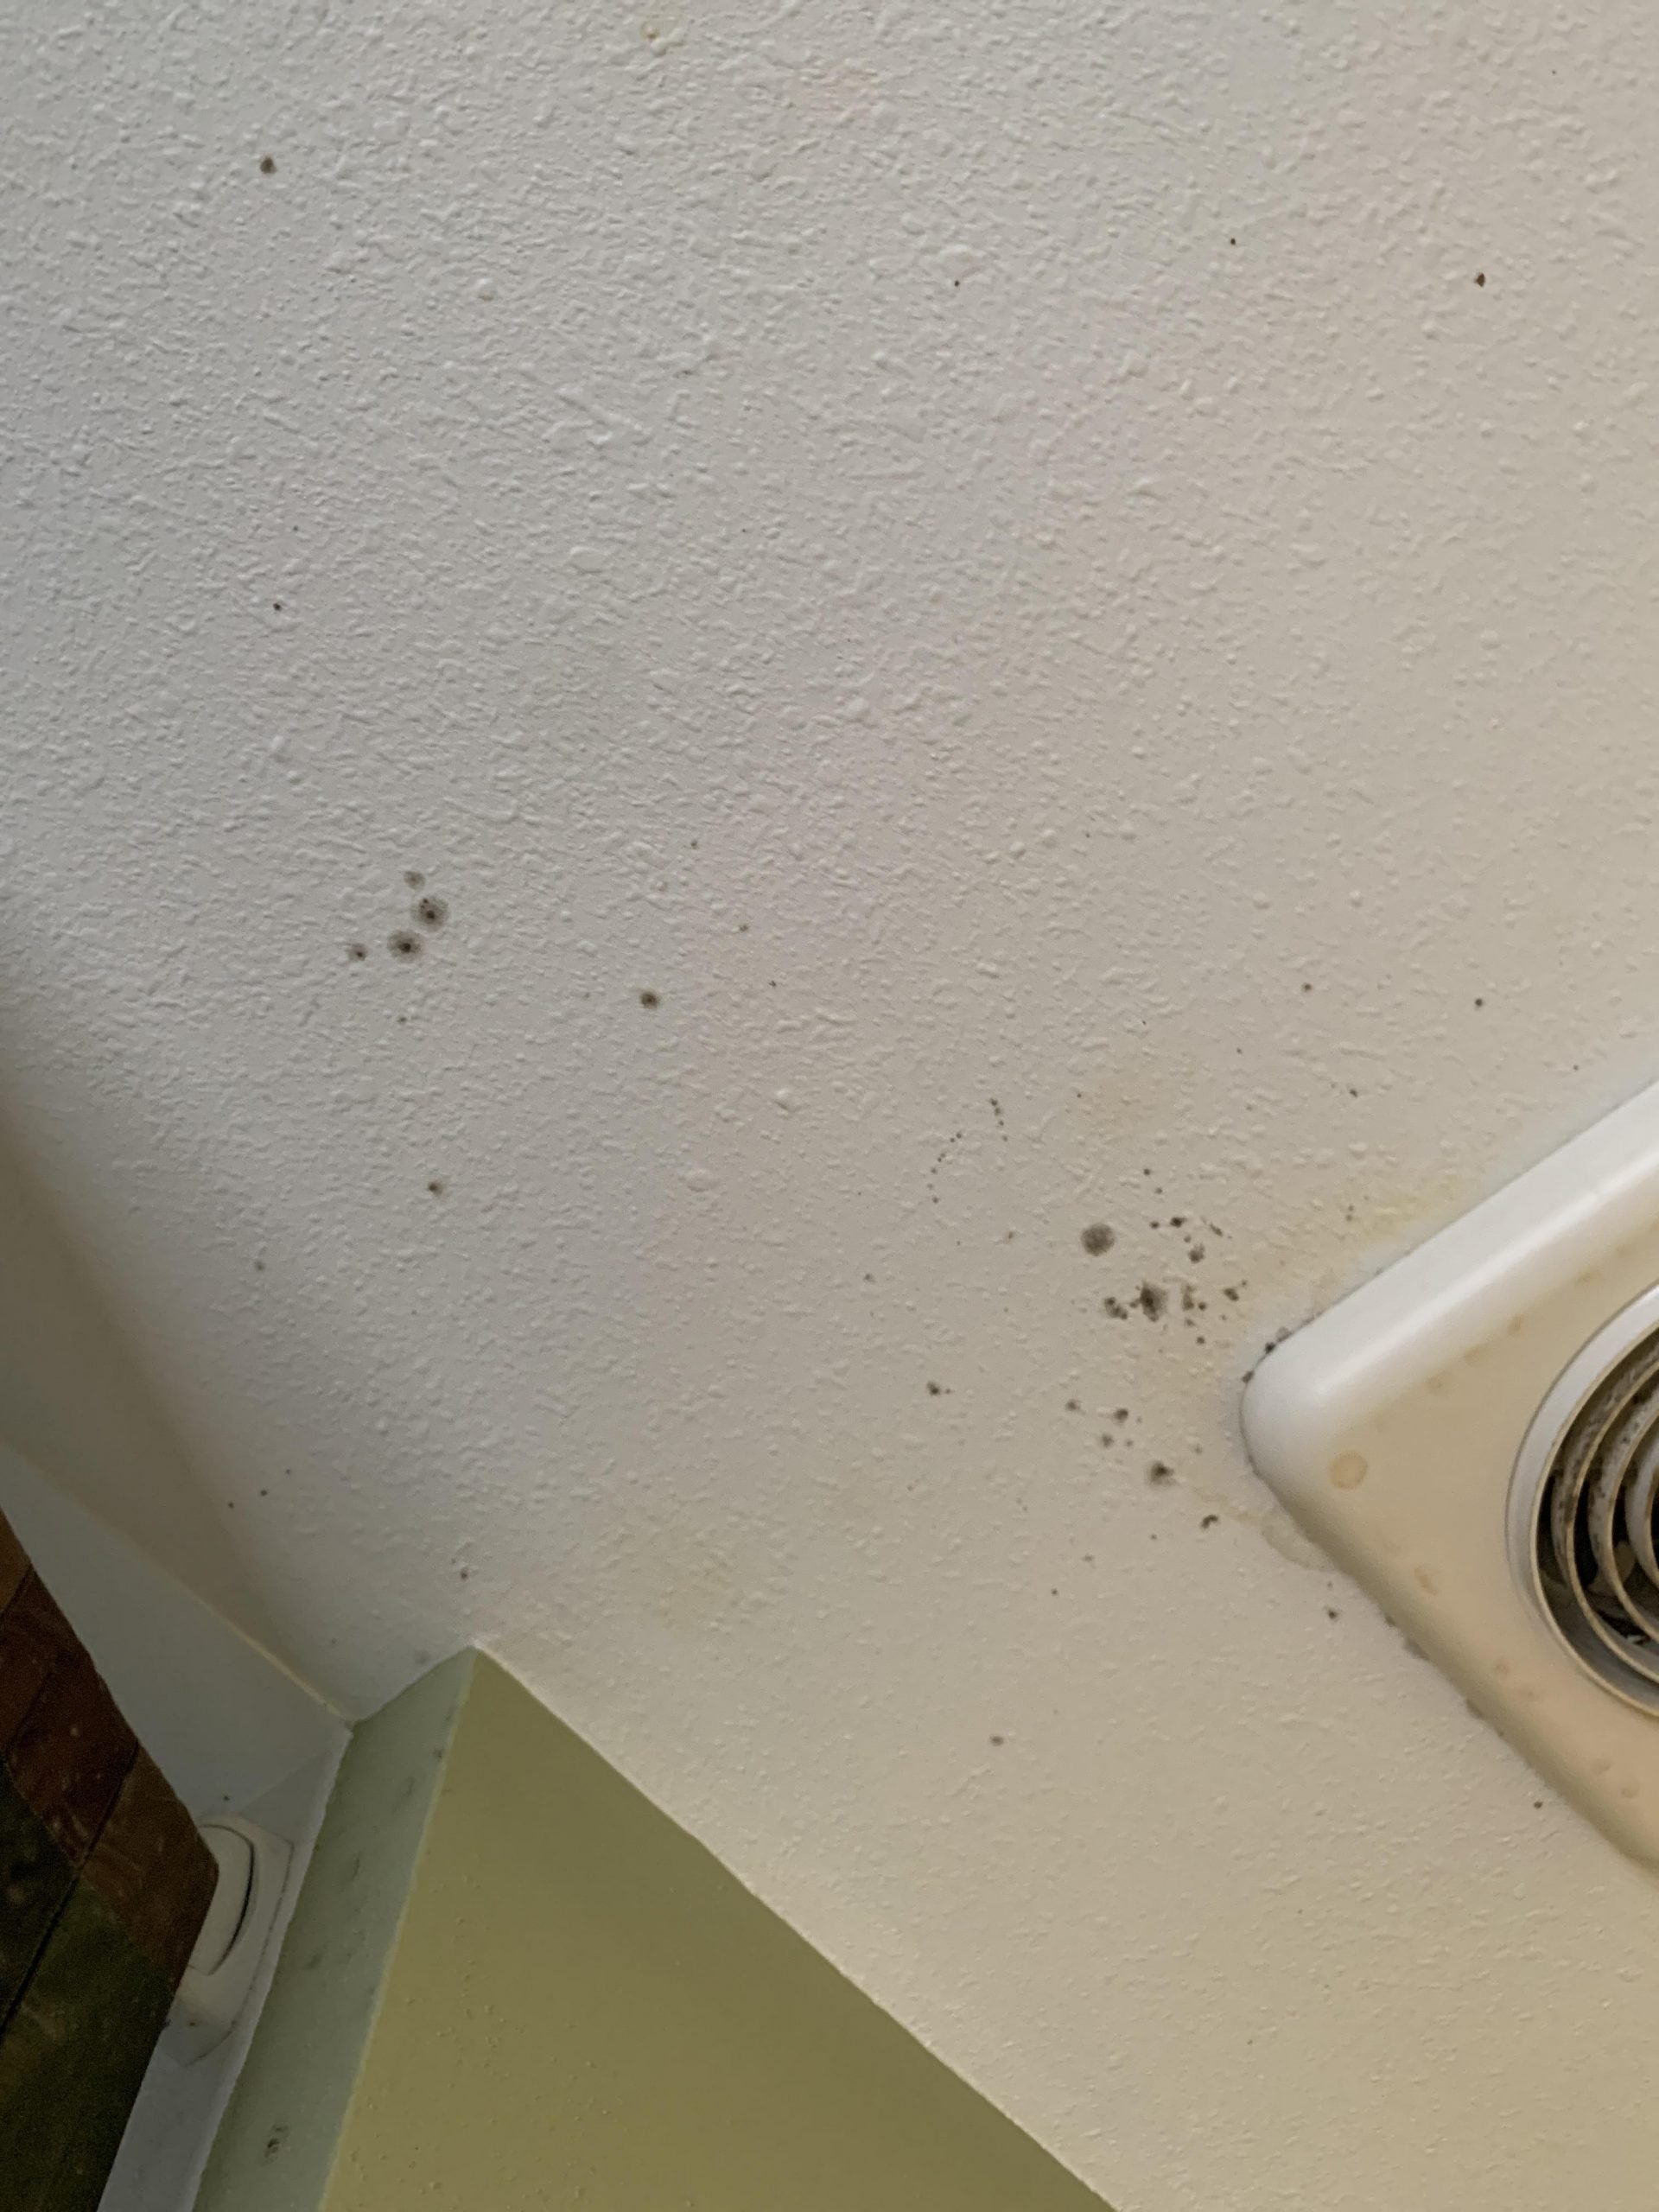 I just found this on the ceiling of my bathroom, is this mold? : Mold